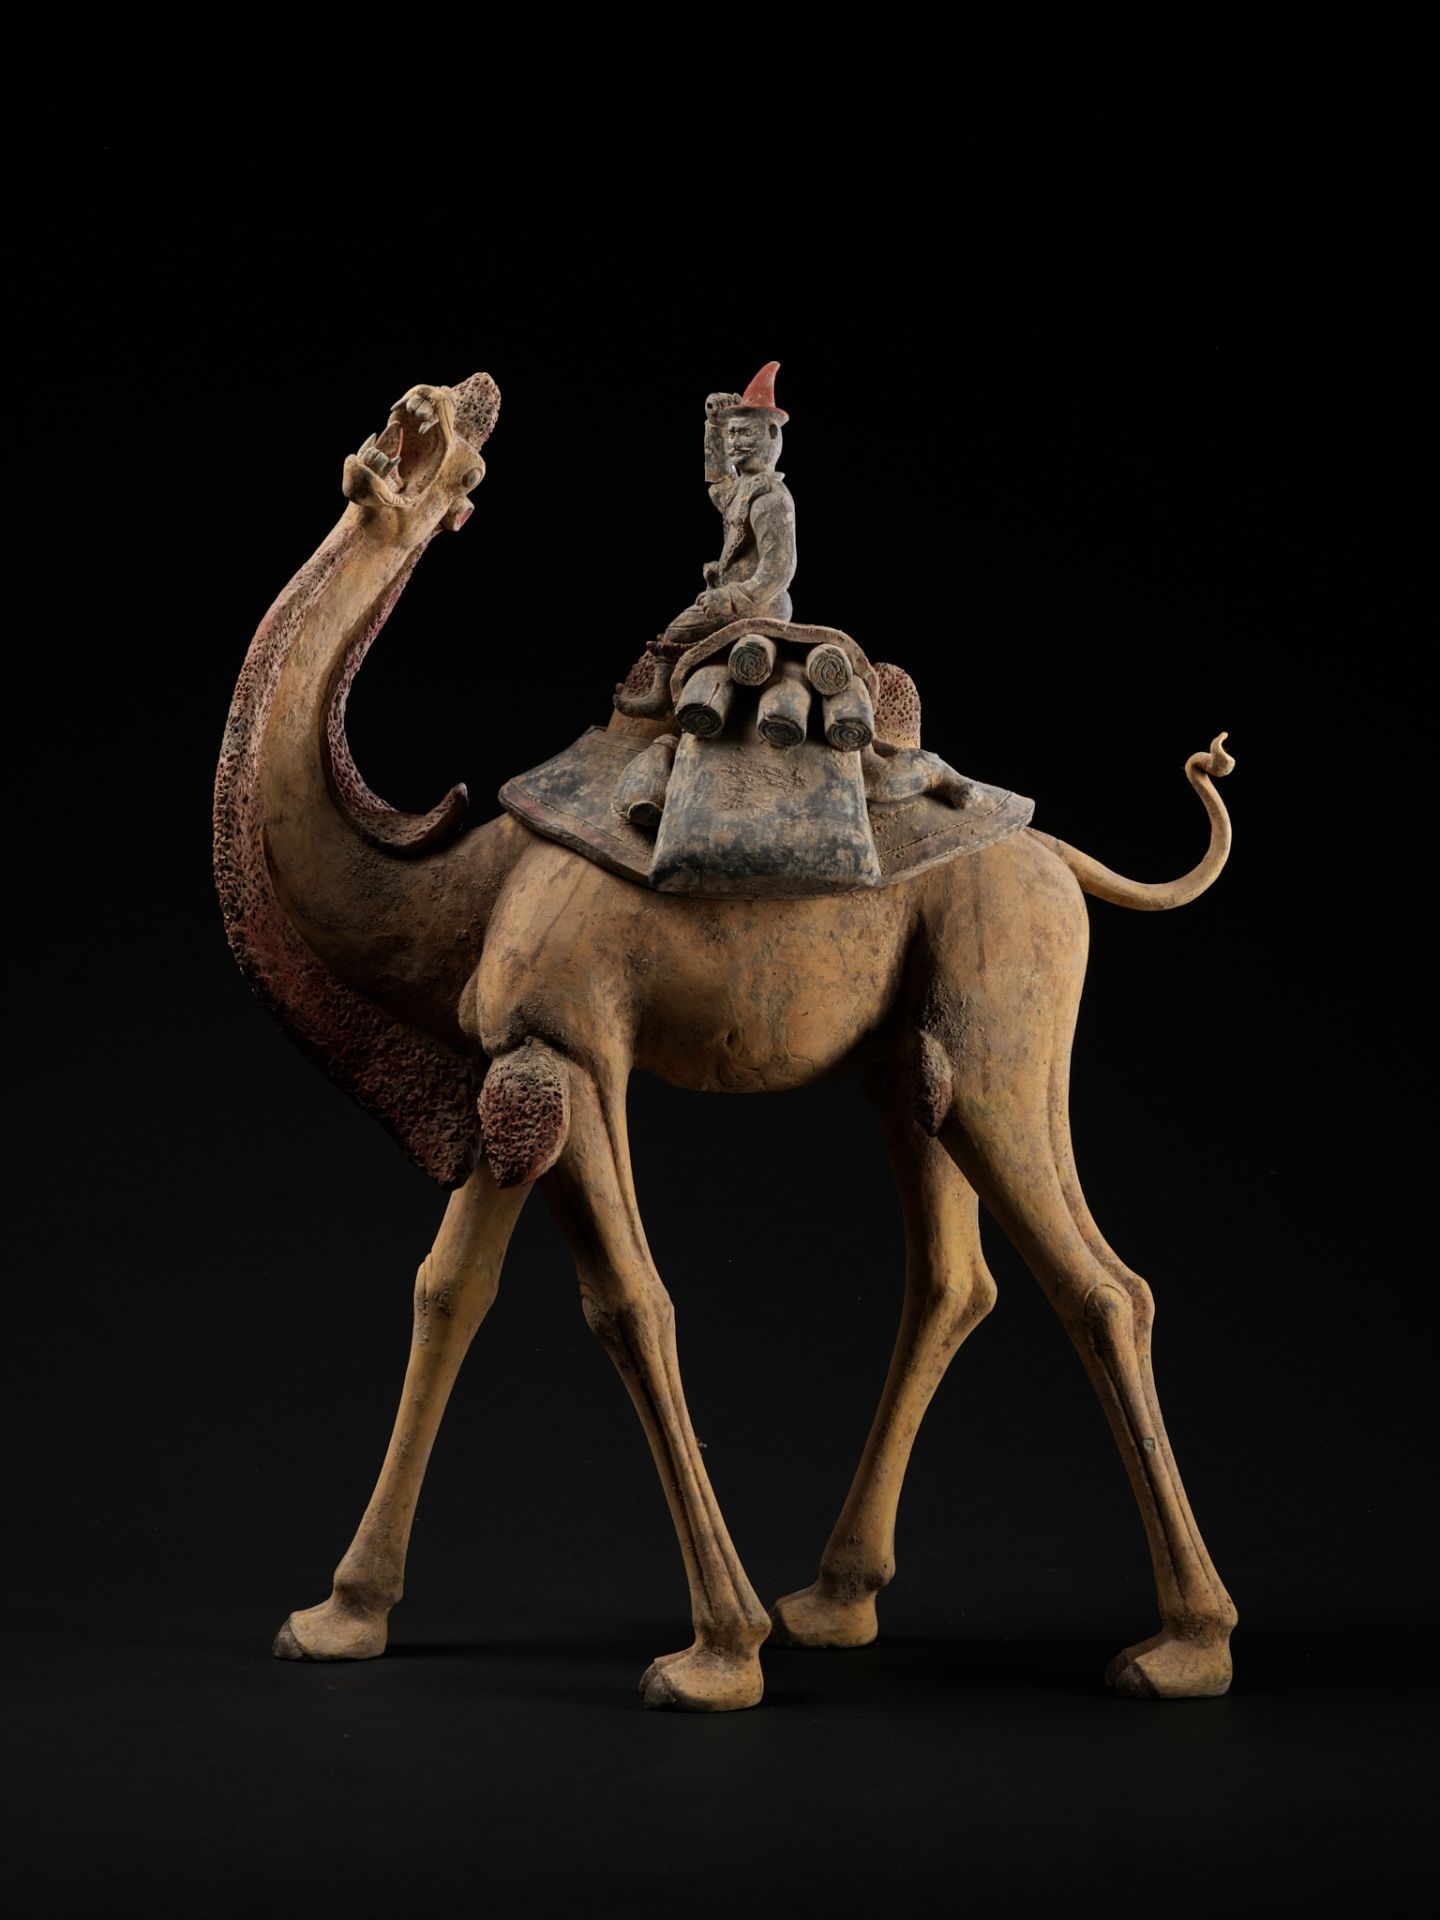 AN EXCEPTIONALLY LARGE PAINTED POTTERY FIGURE OF A BACTRIAN CAMEL AND A SOGDIAN RIDER, TANG DYNASTY - Image 7 of 12